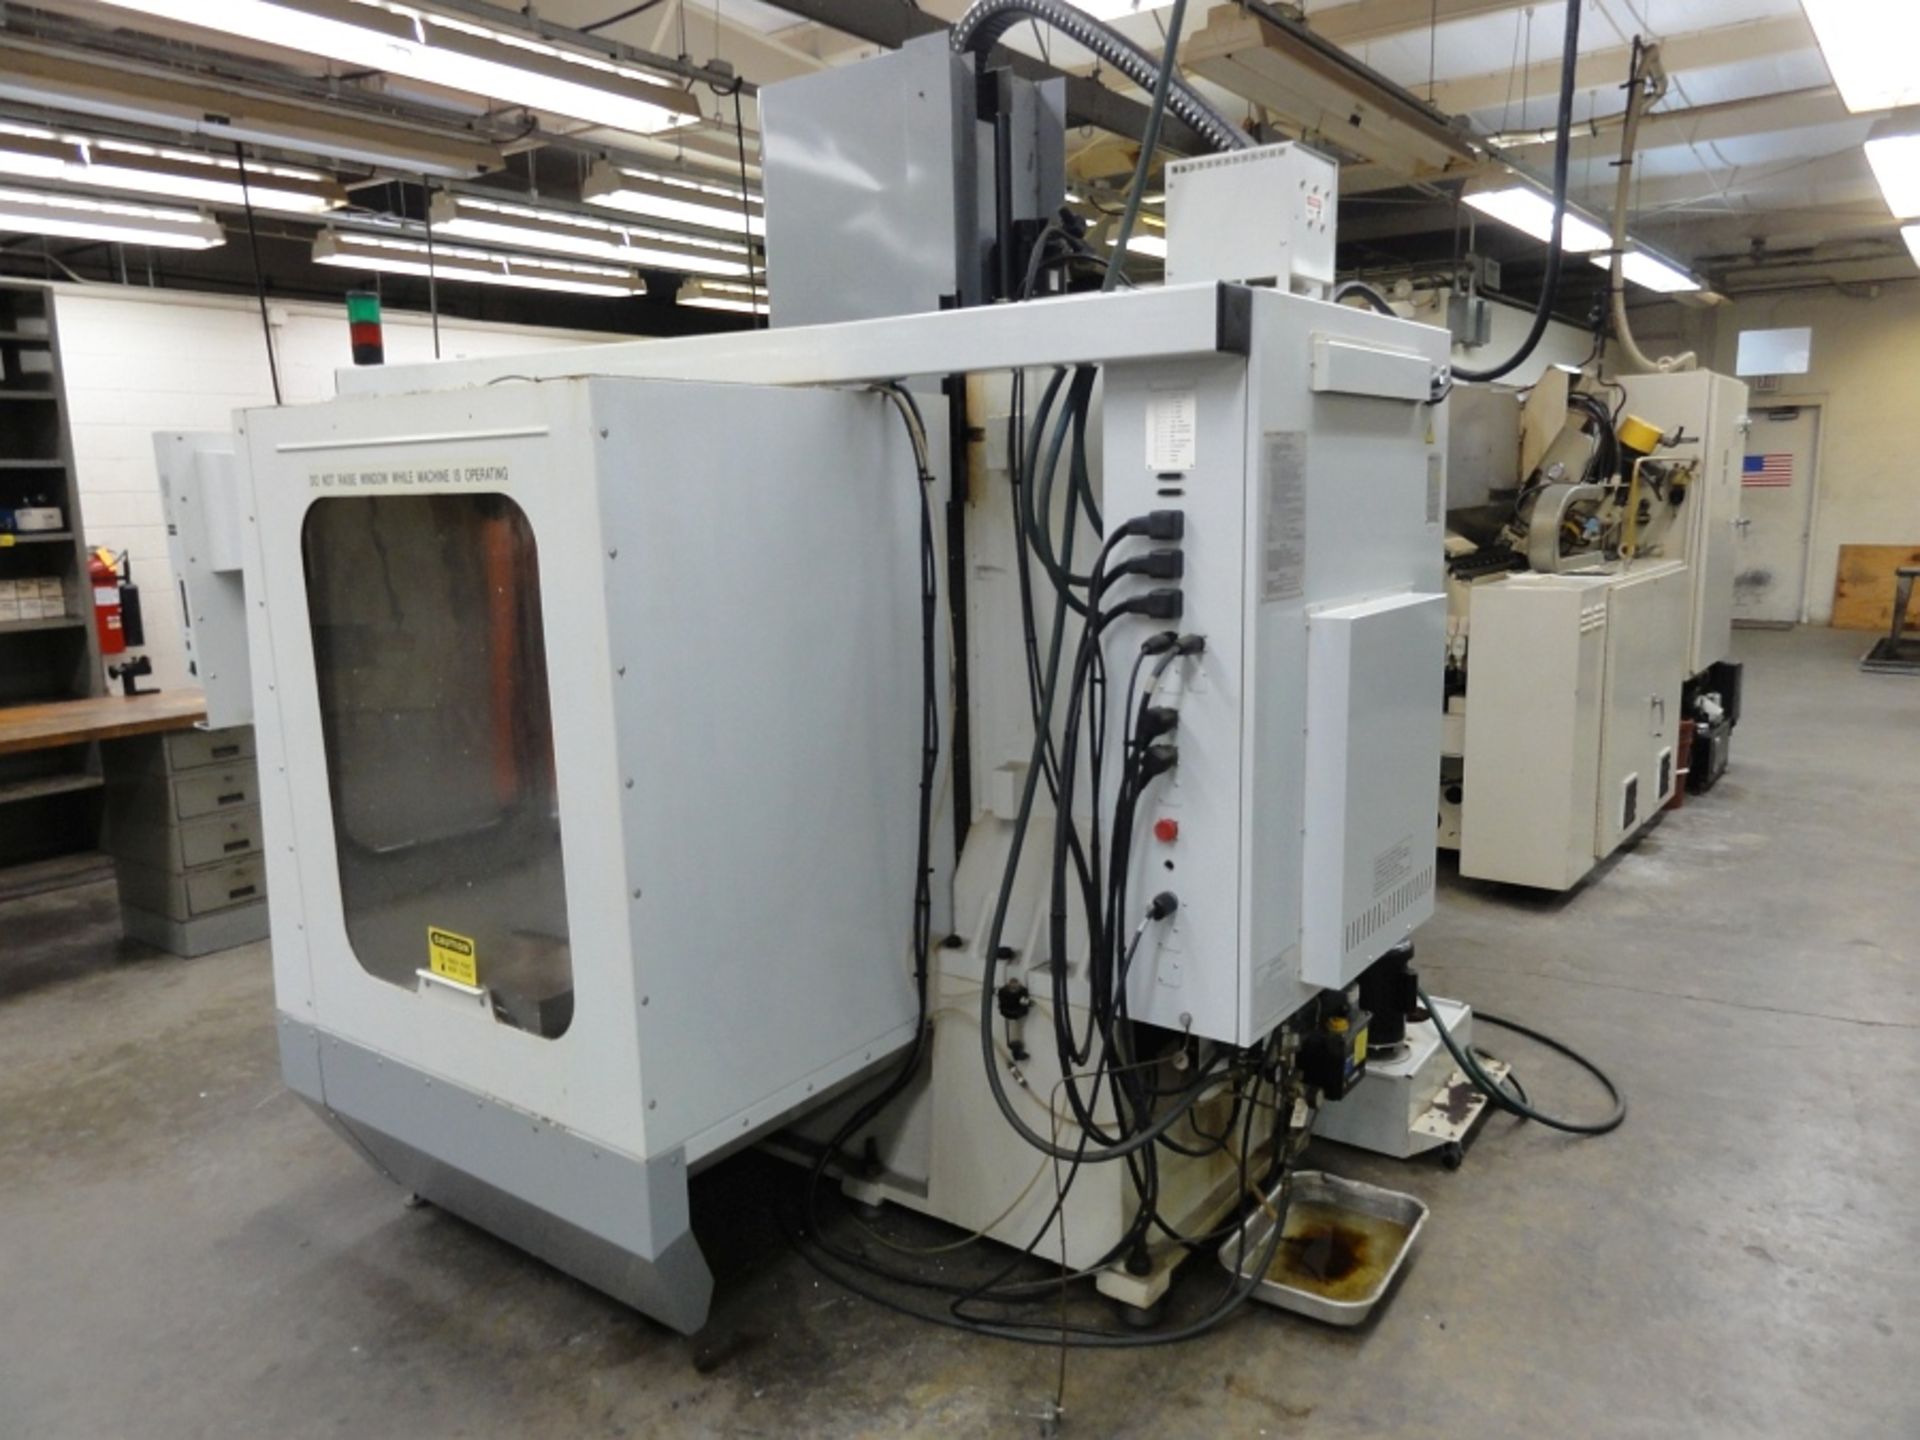 Haas VF2 CNC Milling Machine, 4th Axis Ready 2 HP, SN 18461, 1999, 2723 cut time hrs. - Image 7 of 8